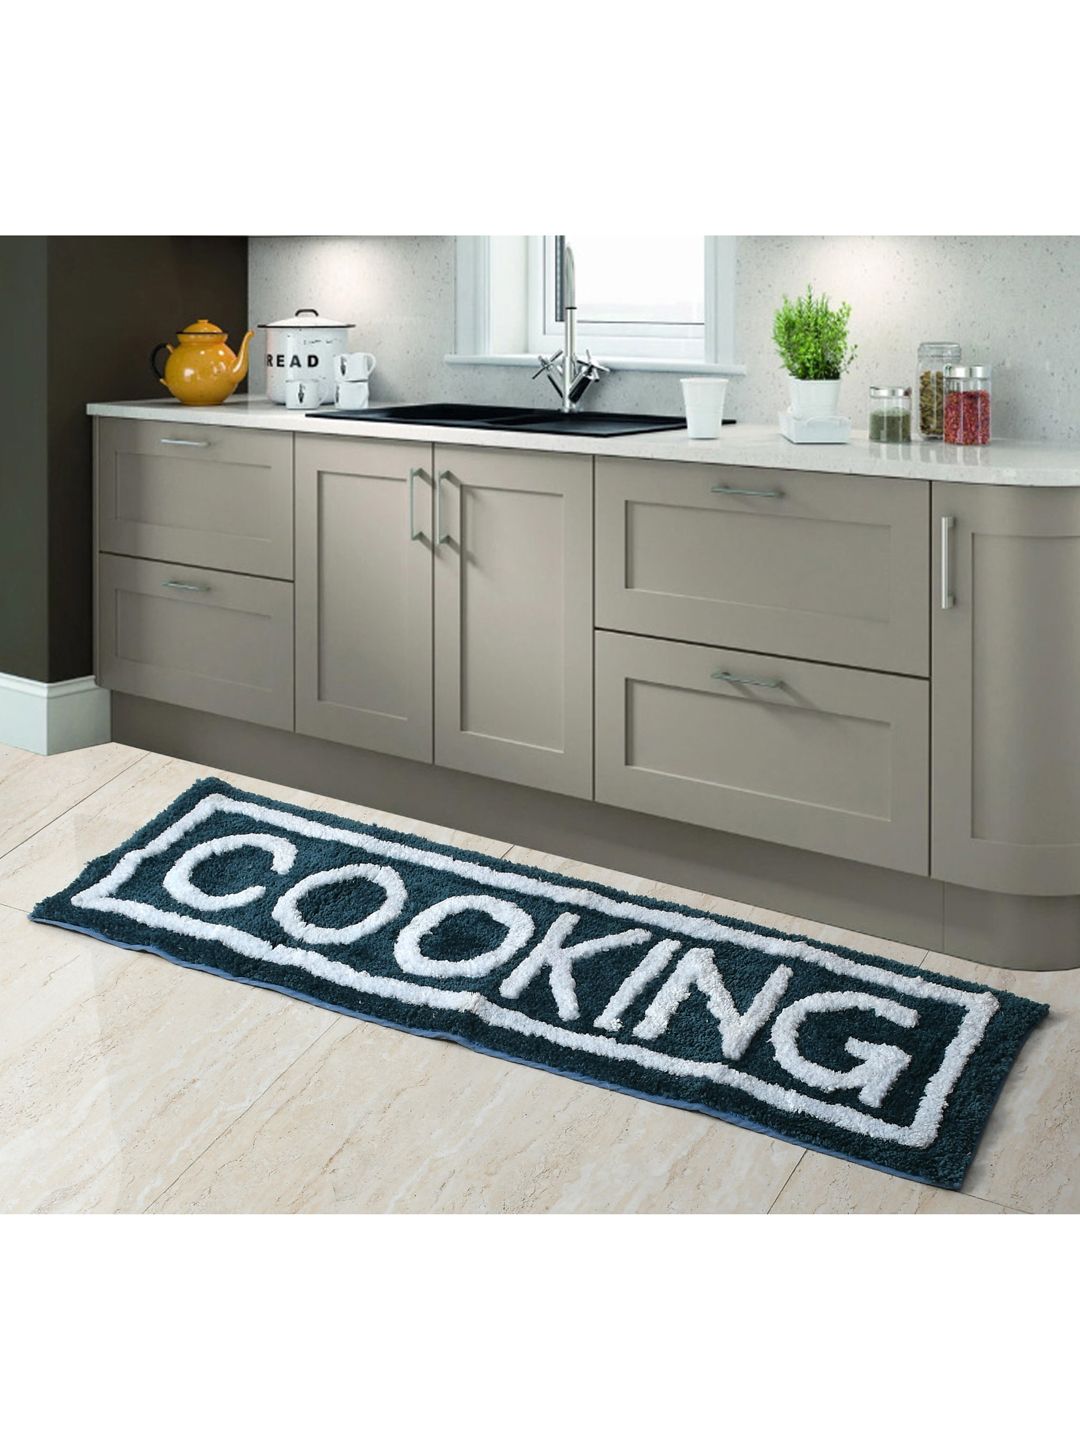 AEROHAVEN Teal & White Quirky 1850 GSM Anti Slip Kitchen Runner Price in India